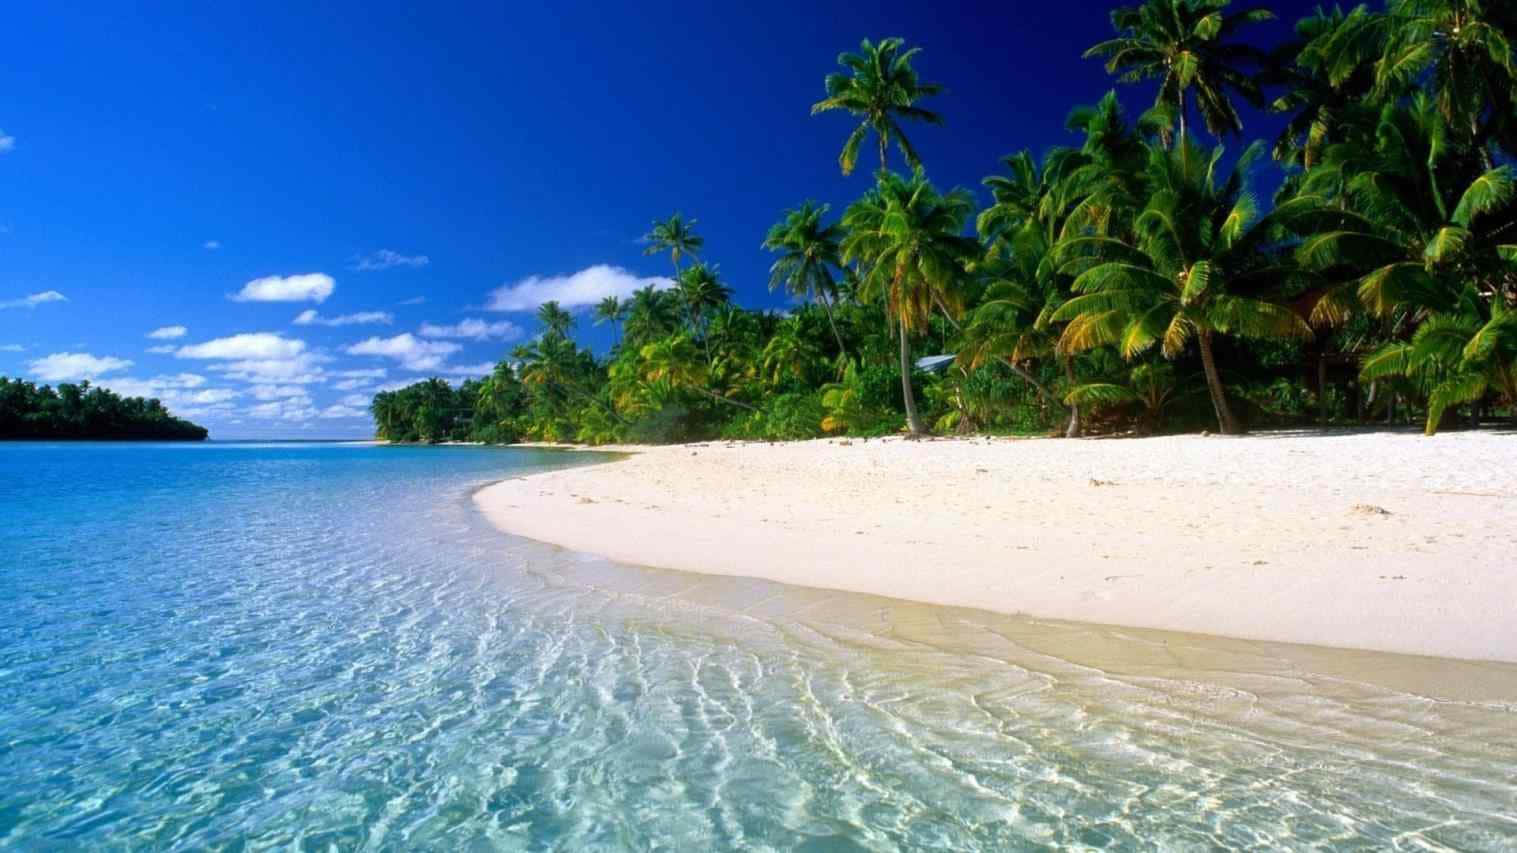 A Beach With Palm Trees And Clear Water Wallpaper